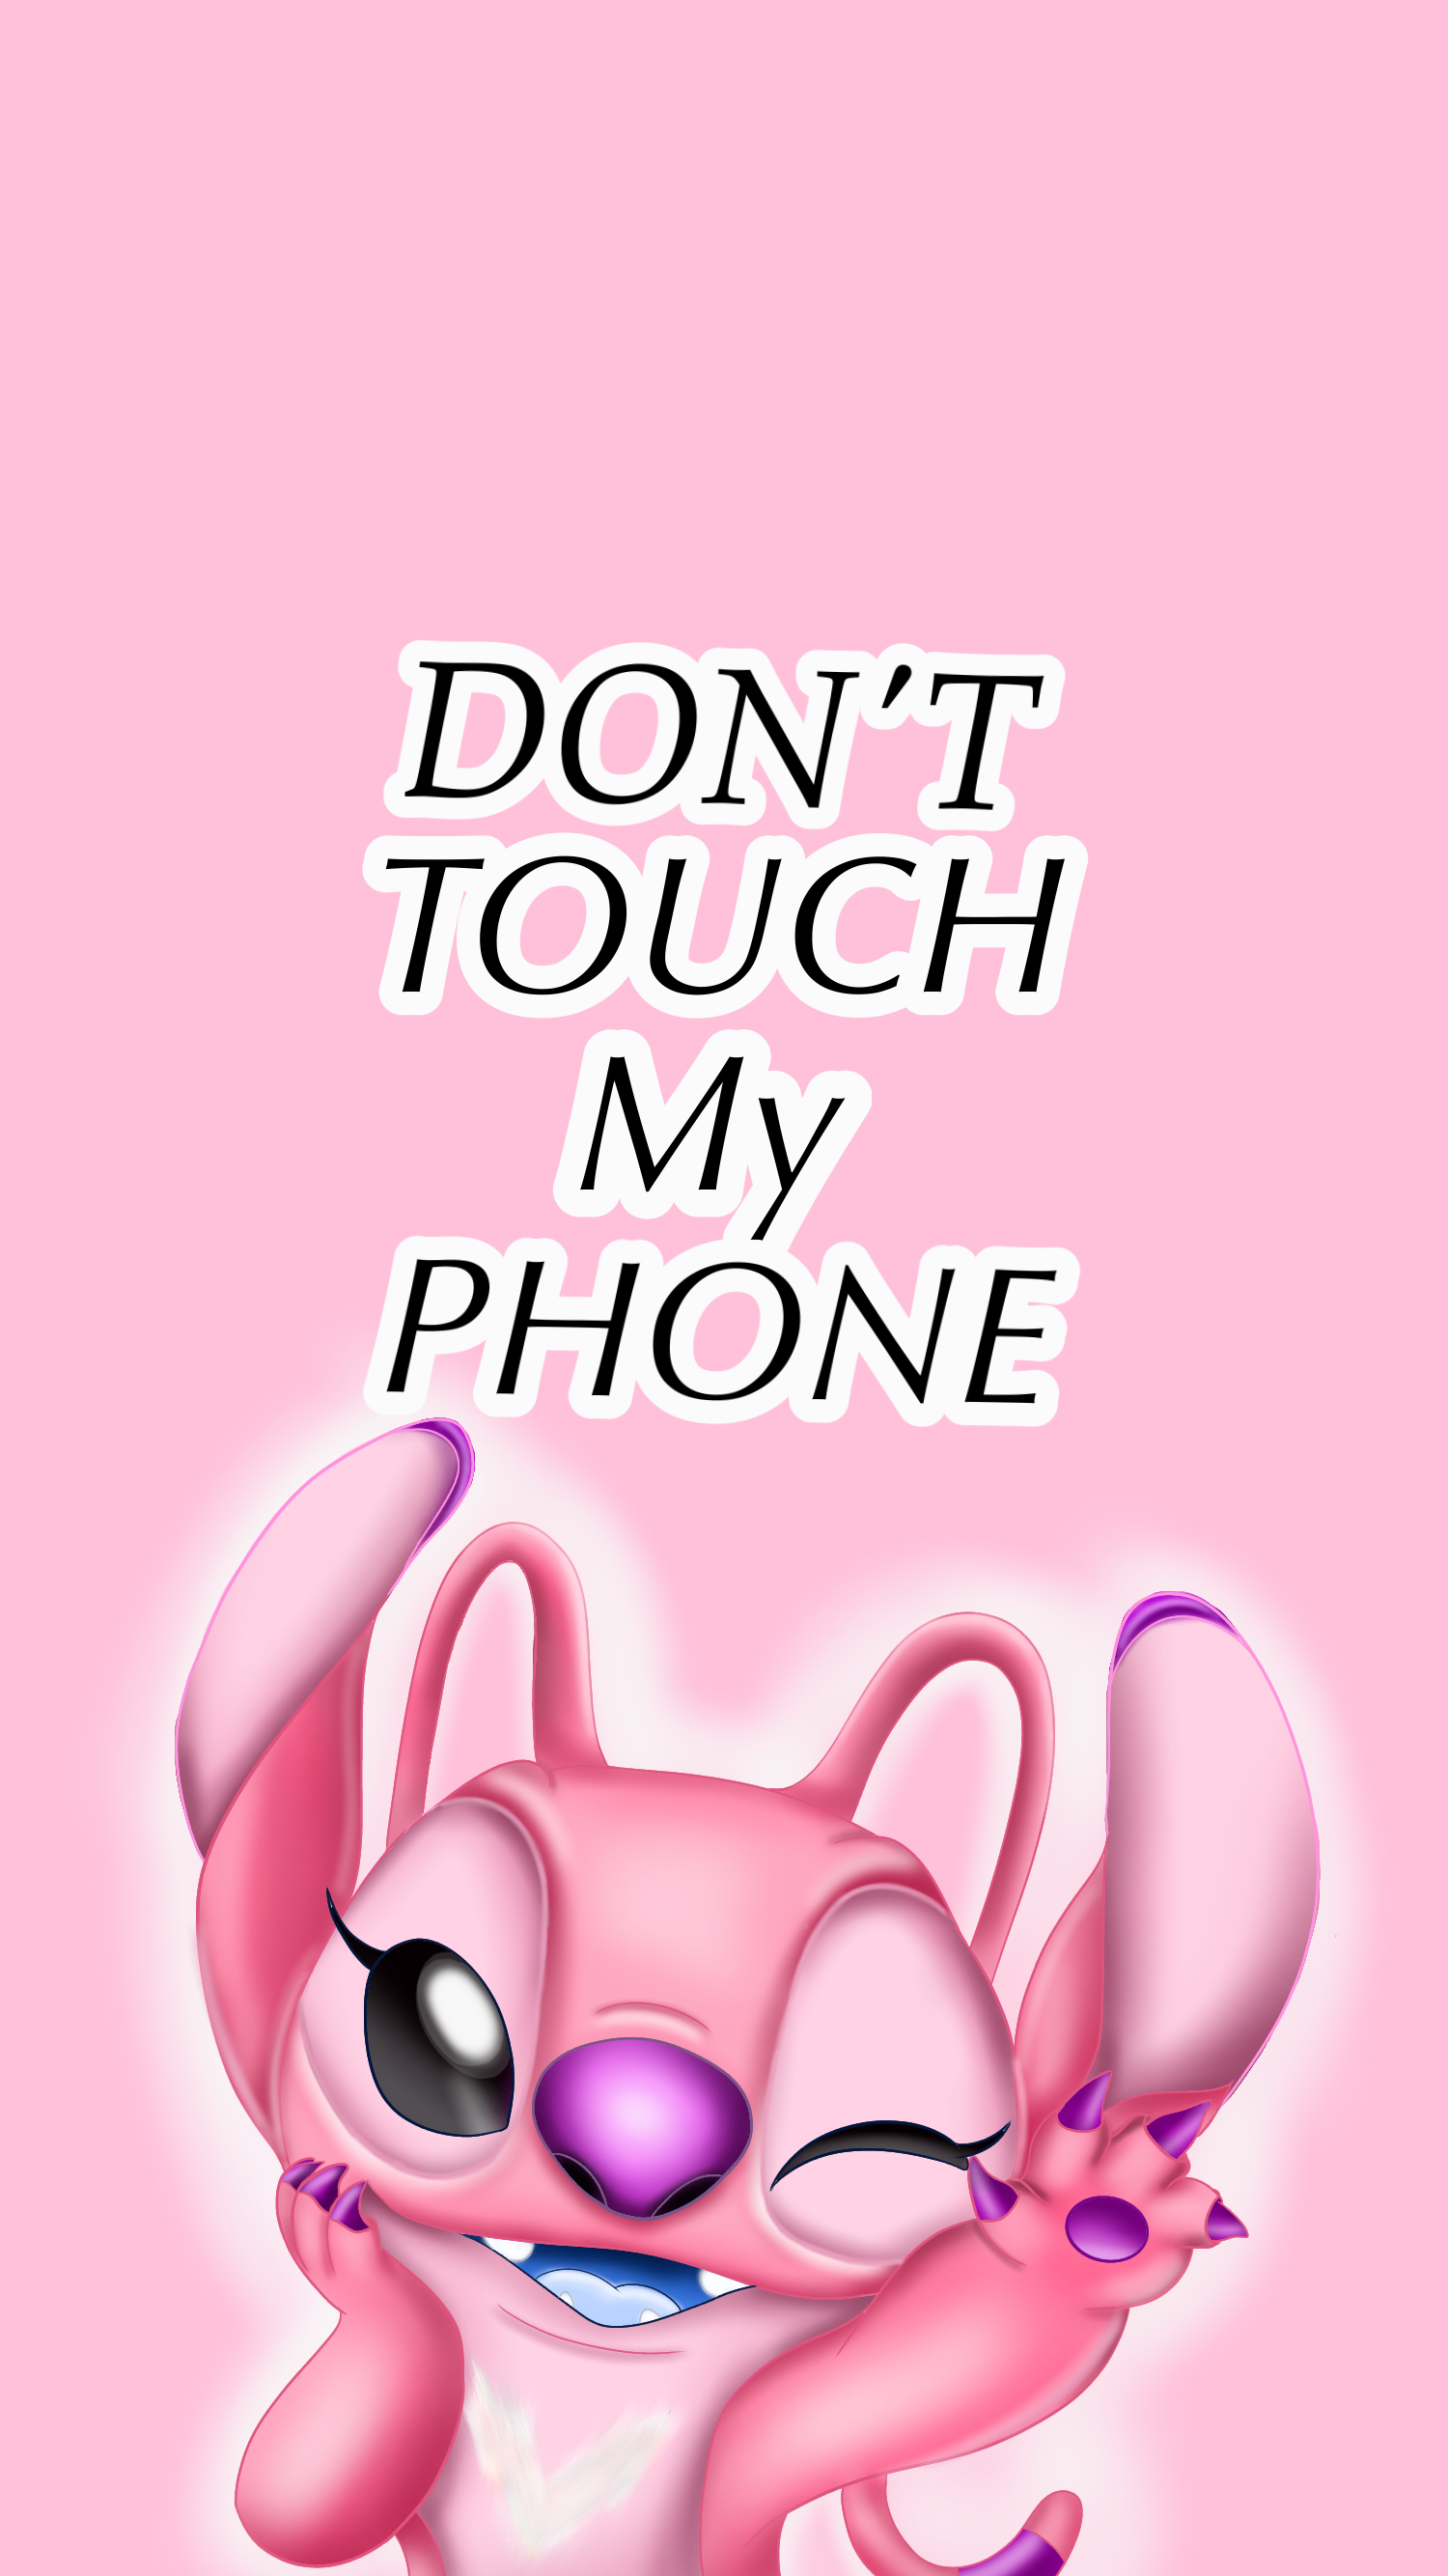 Cute Dont Touch My Phone Wallpaper Best Sale 60 OFF www